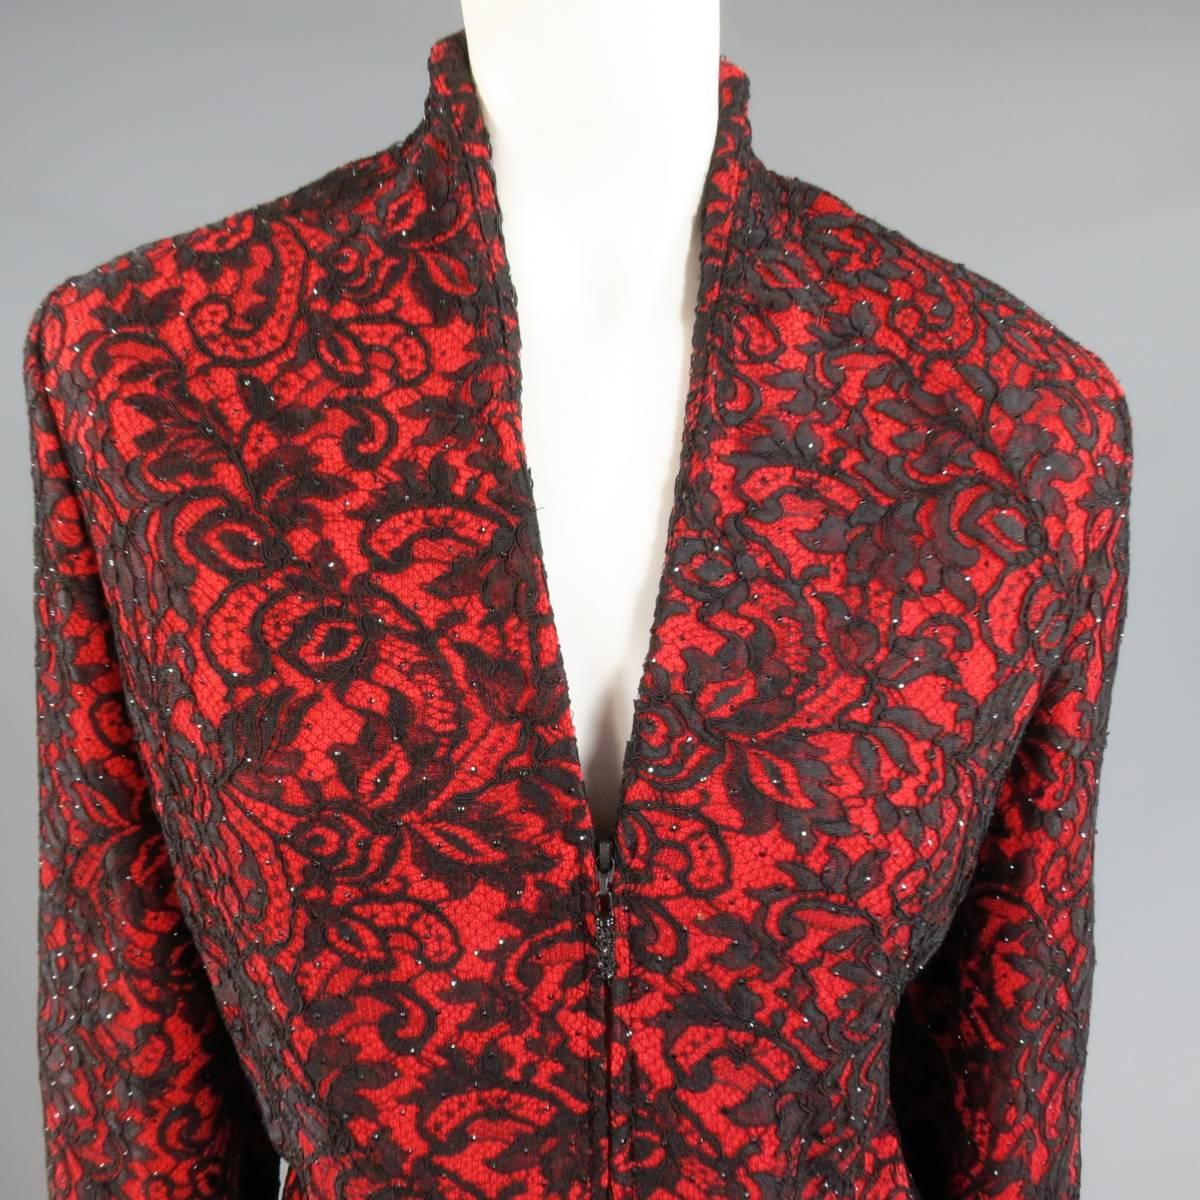 This gorgeous vintage ST. JOHN EVENING formal jacket comes in a brilliant red fabric with black lace overlay covered in small black crystals and features a deep V collarless neckline, zip up closure with black crystal tab, and lace fringe trim. Some